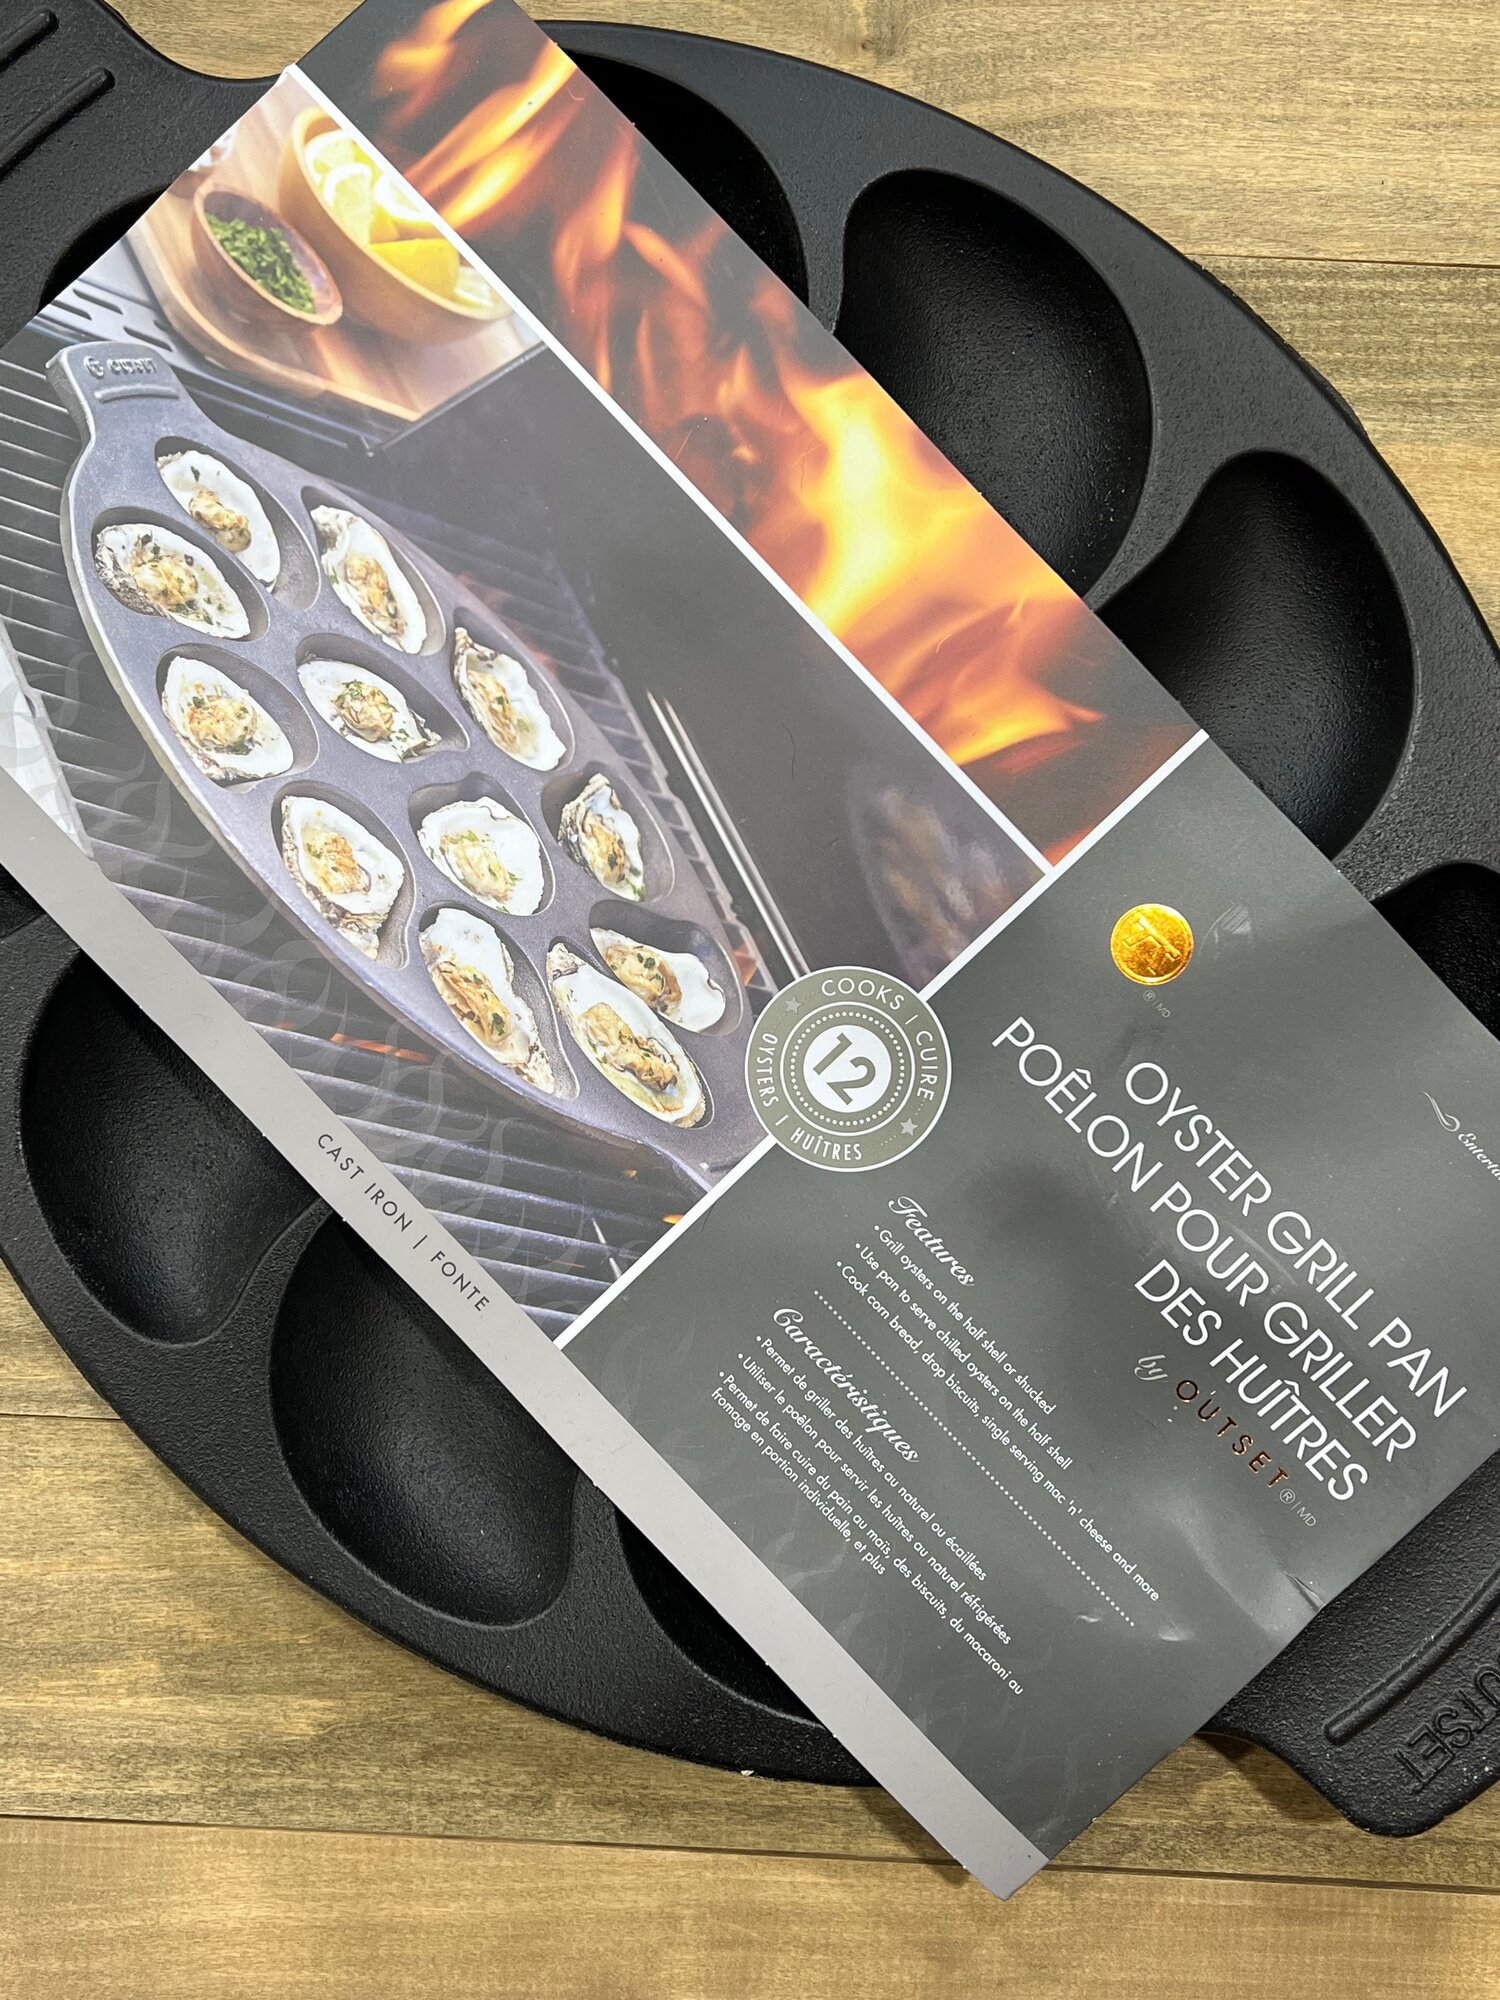 UOIENRT 3 Pack Oyster Plate, Stainless Steel 8 Slots Oyster Grill Pan with  Center Slot Multi-Functional Grill Pan for Oysters and Scallop, Sauce and